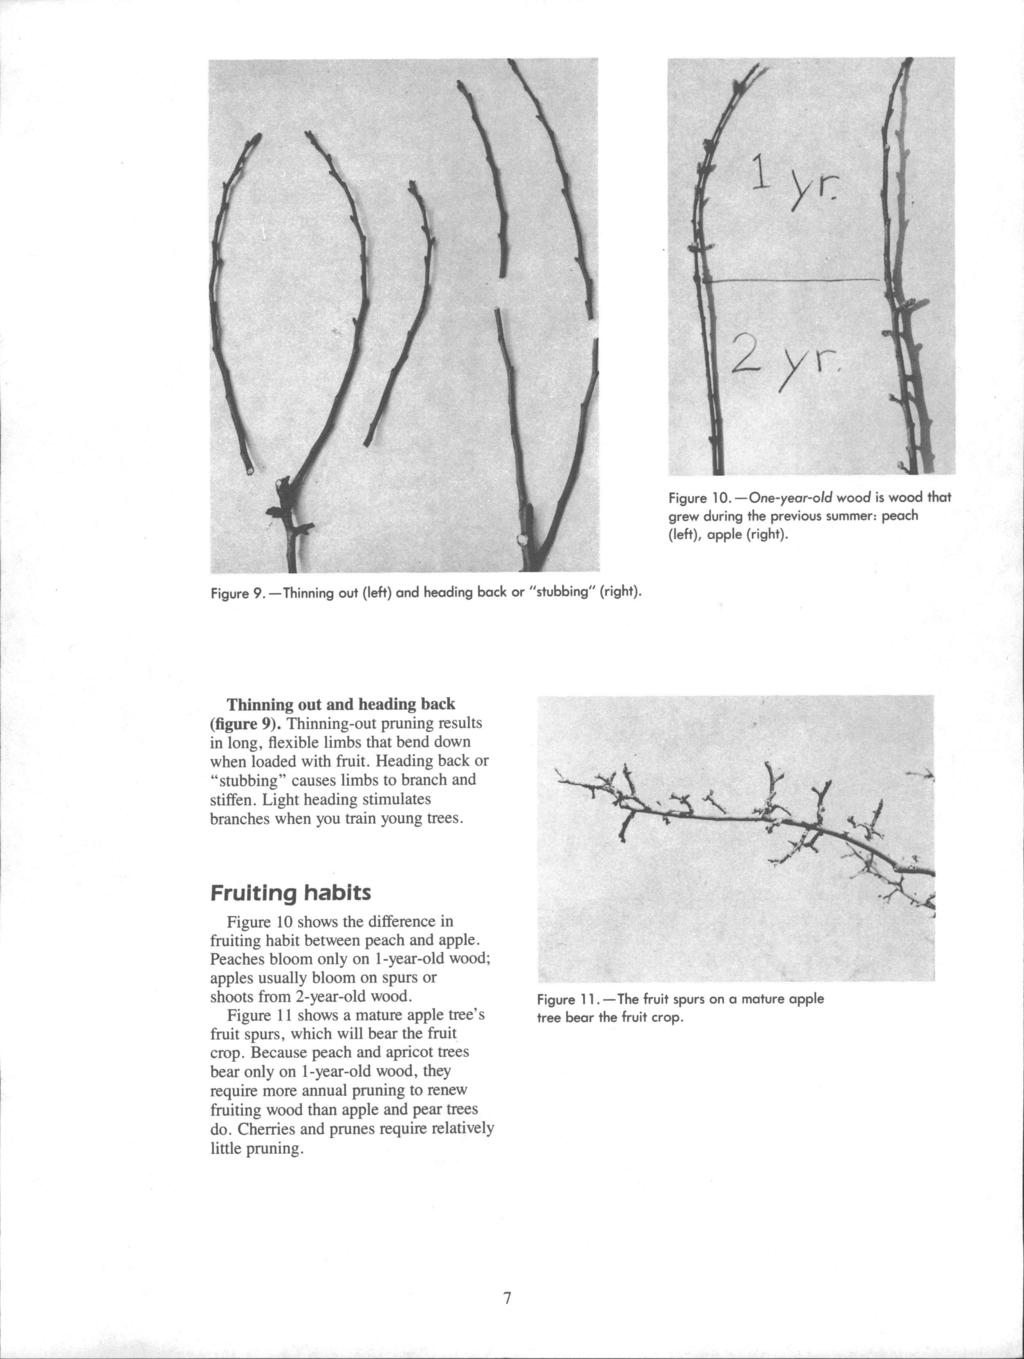 Figure 10.One-year-old wood is wood that grew during the previous summer: peach (left), apple (right). Figure 9.Thinning out (left) and heading back or "stubbing" (right).